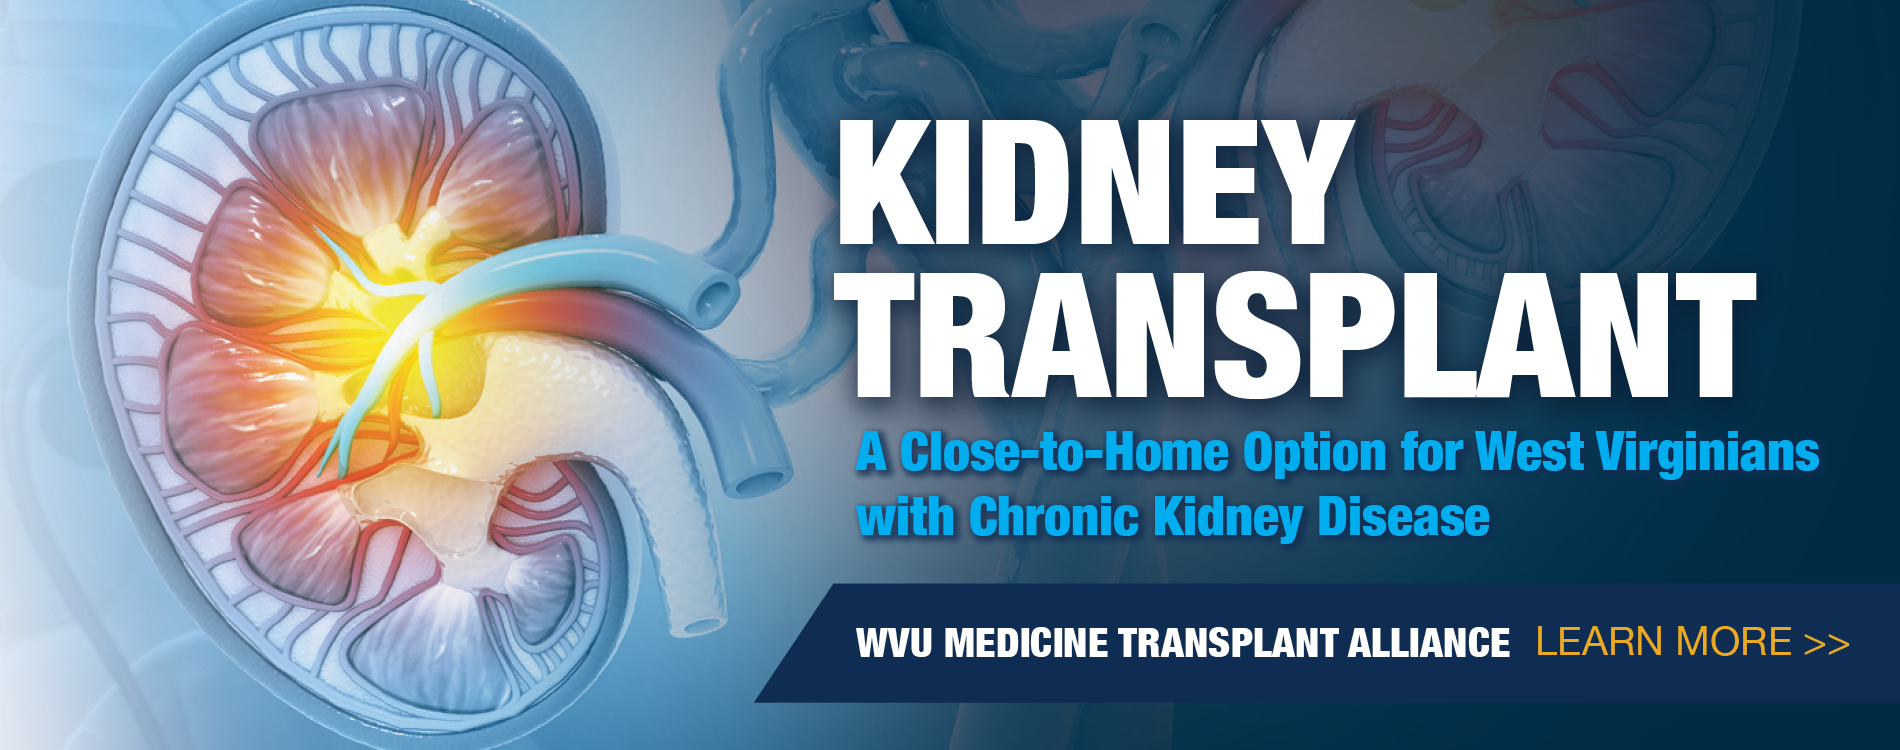 Kidney Transplant A close-to-home optionf or West Virginians with chronic kidney disease